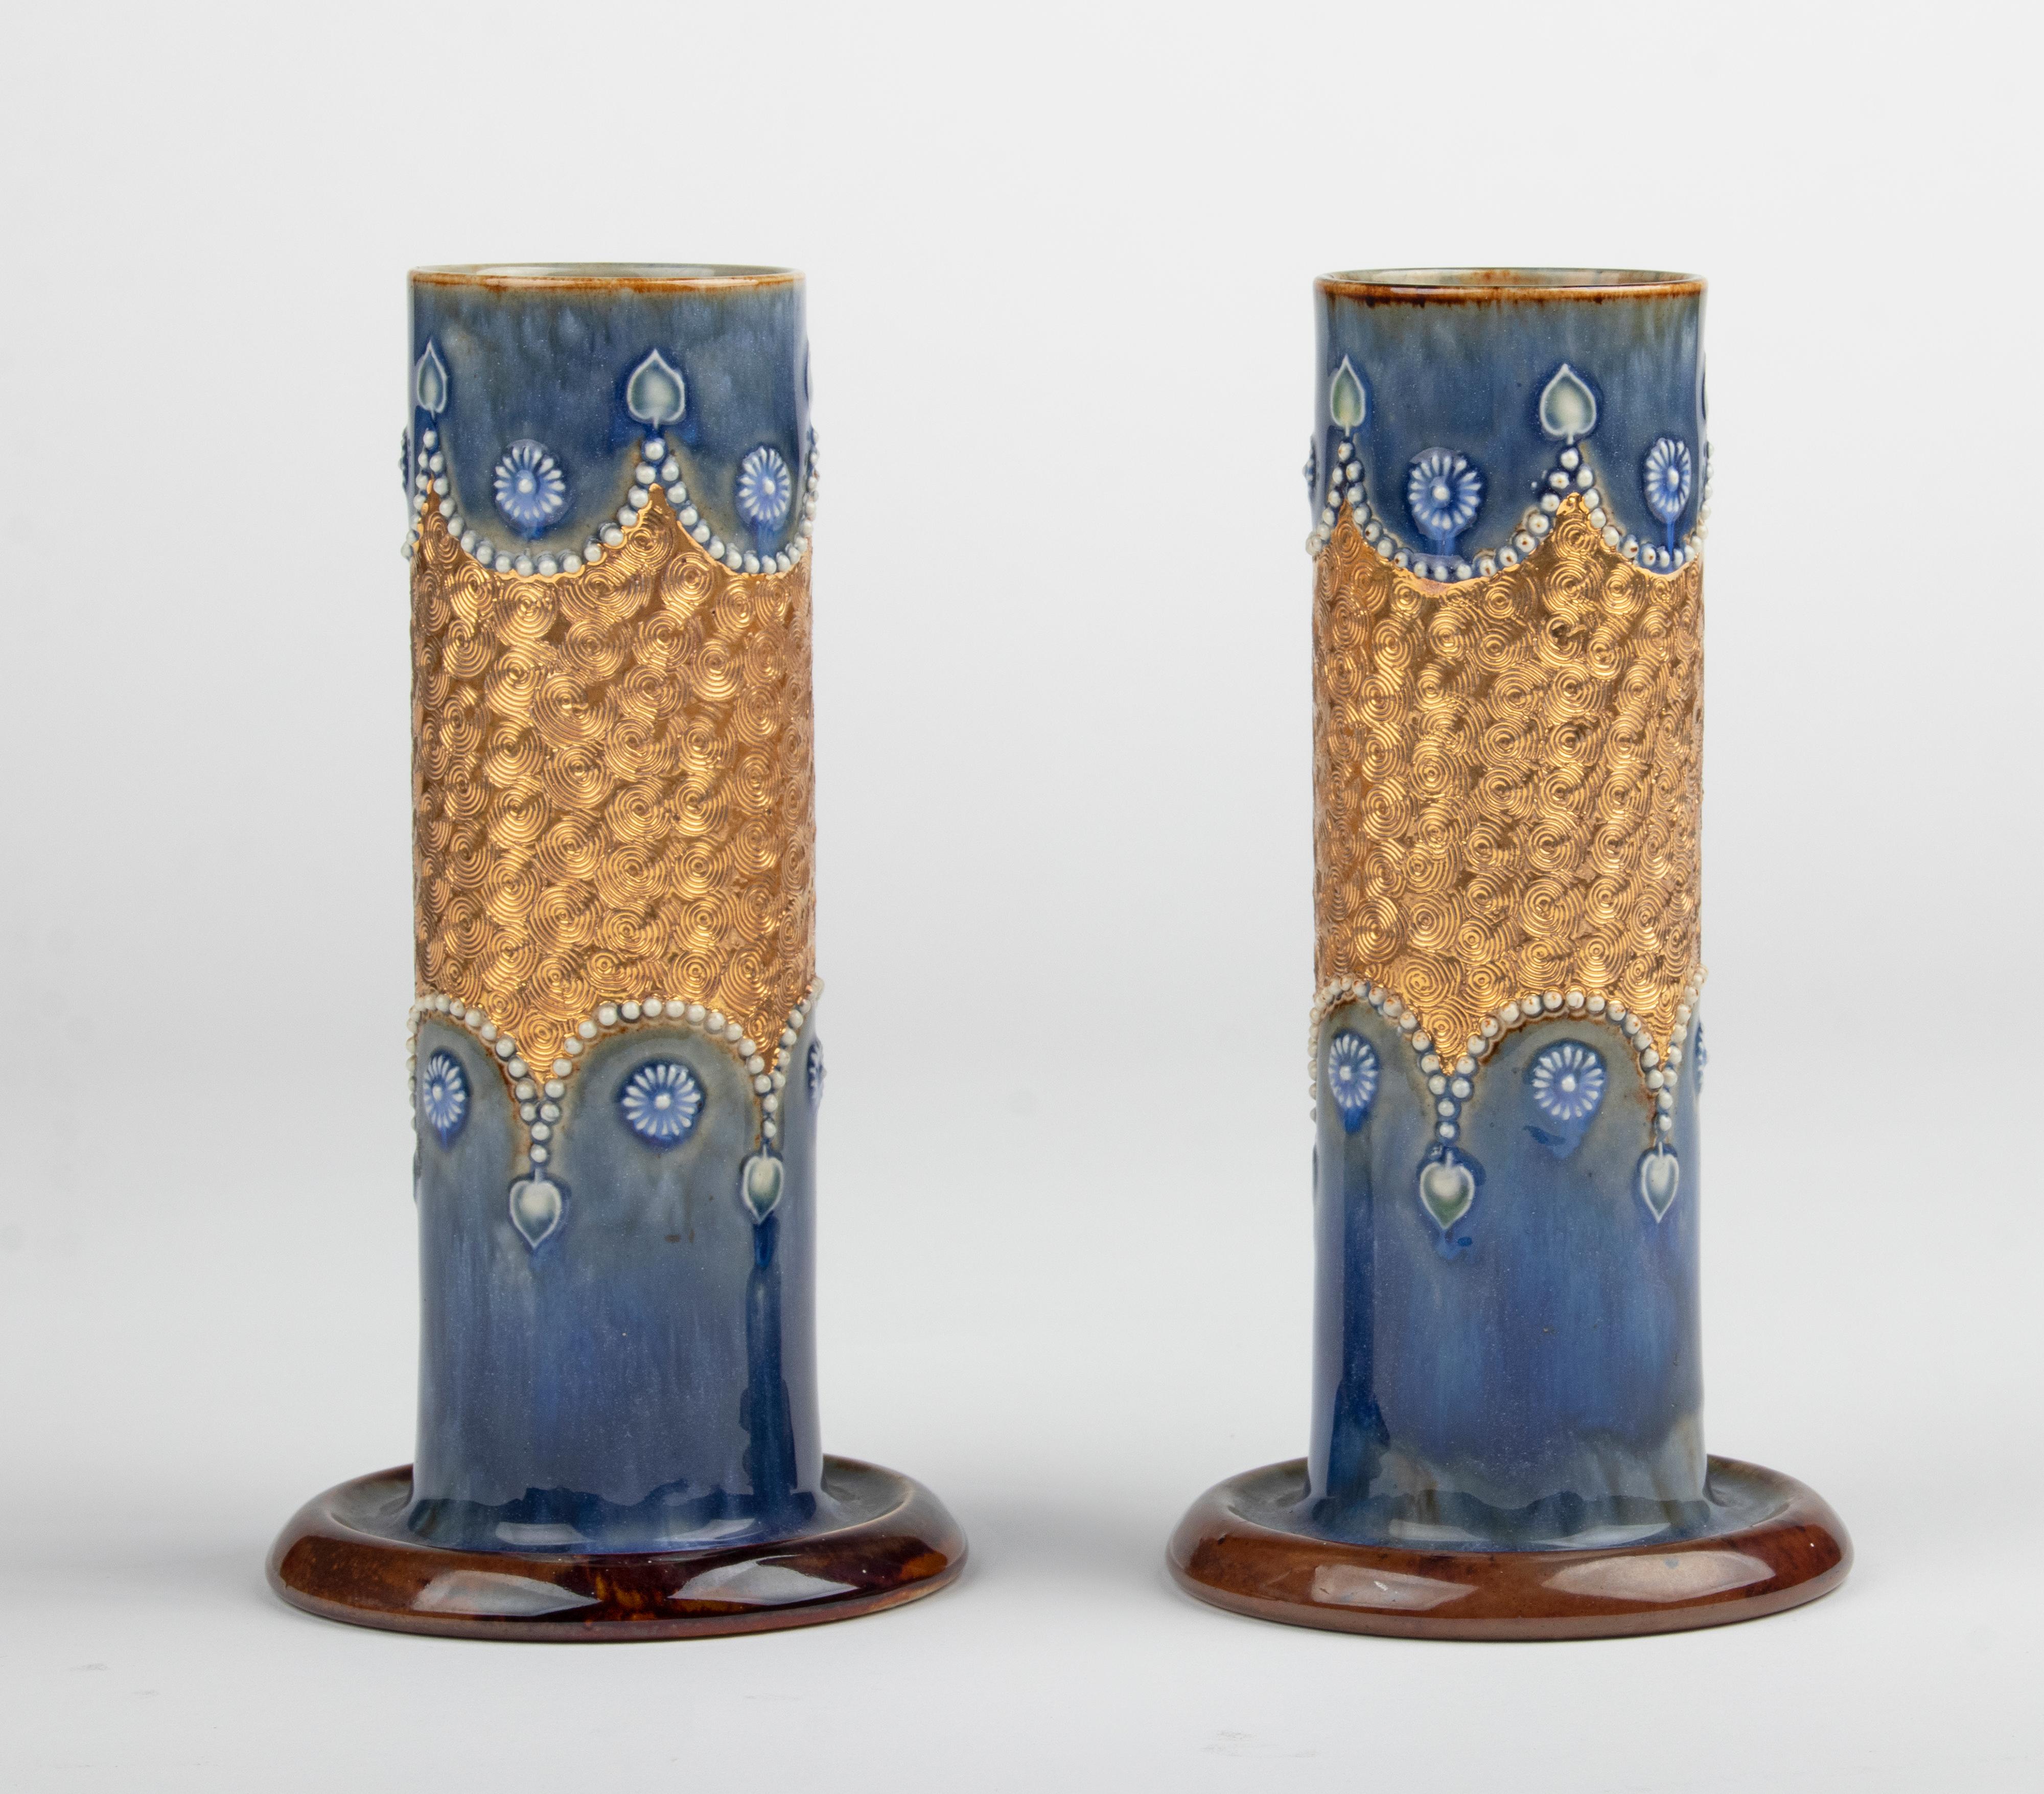 Art Deco Pair of Ceramic Cylinder Vases by Royal Doulton Model 8409